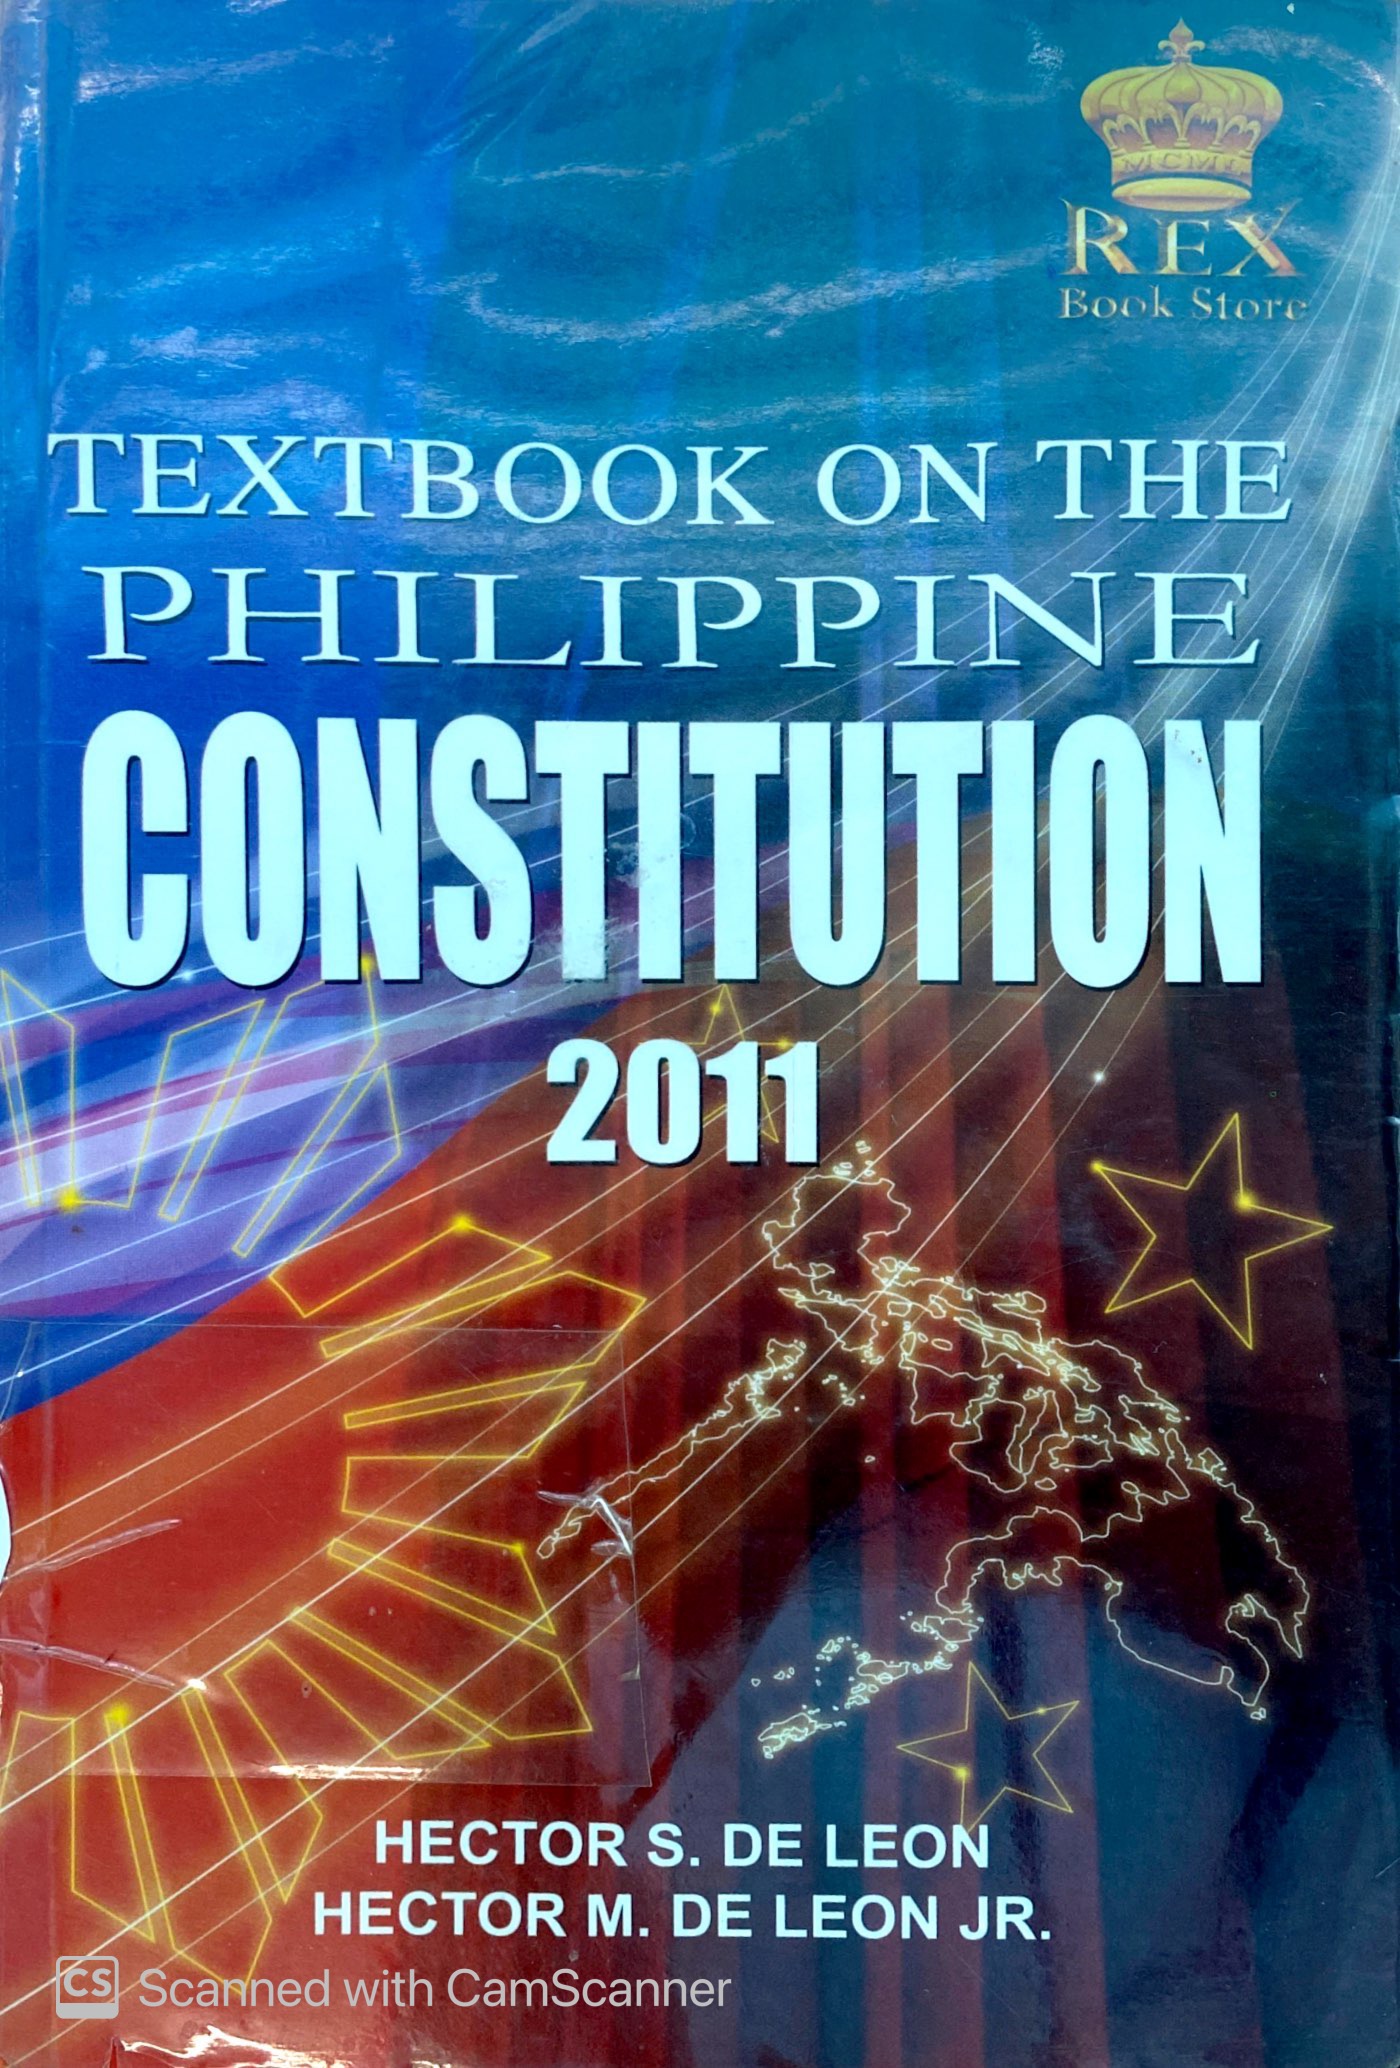 Textbook on the Philippine Constitution